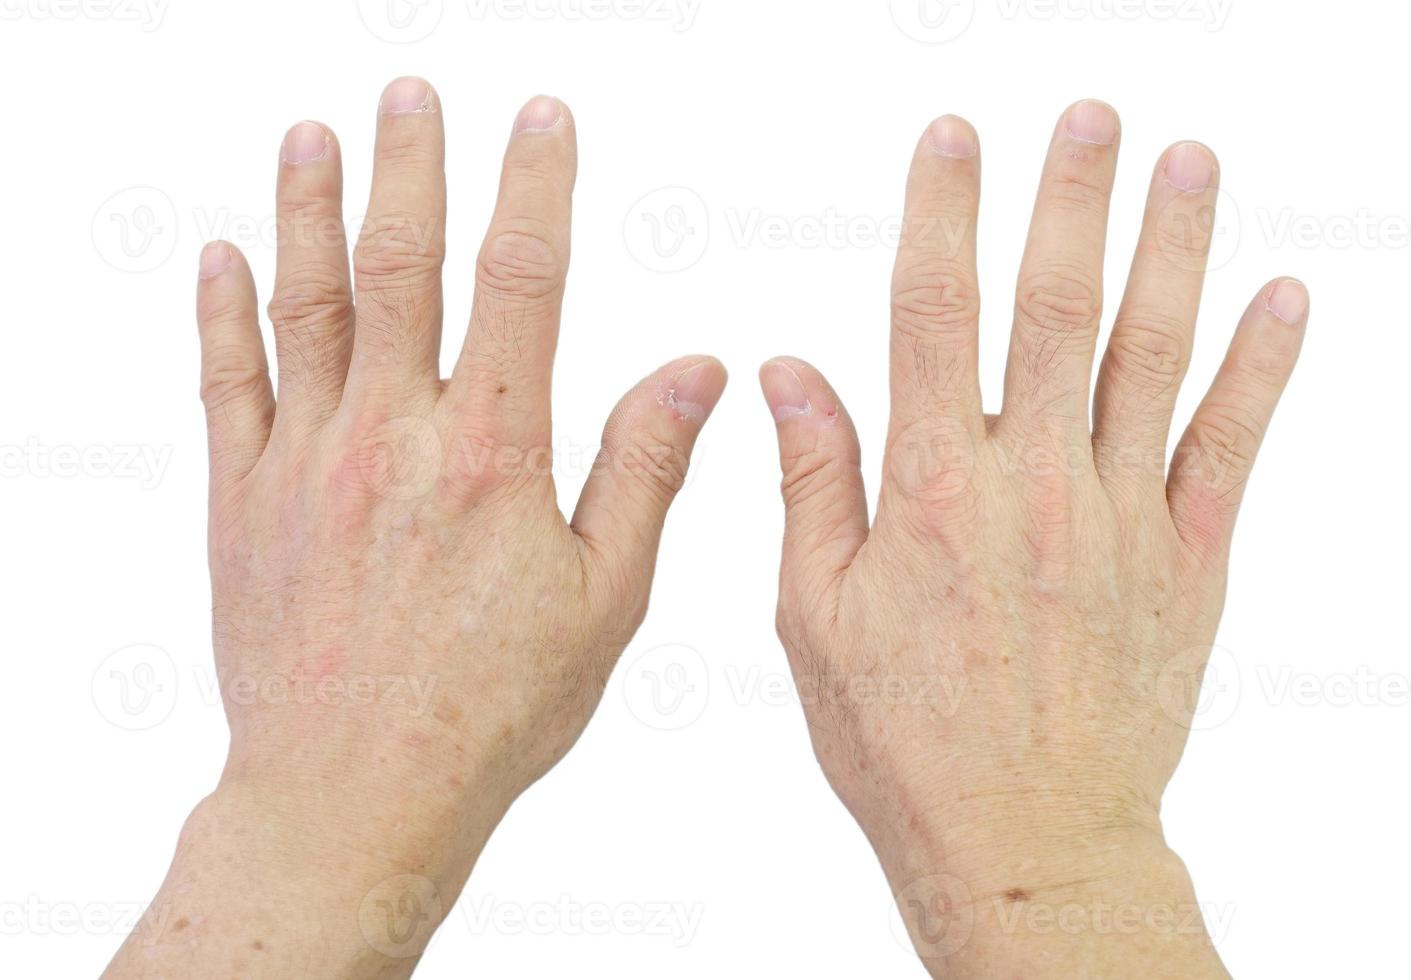 Small brown spots on the skin of the senior man's hands. Fingers and nails with dry skin, torn and flaking off, cracked skin on cuticles, Isolated on white background. photo